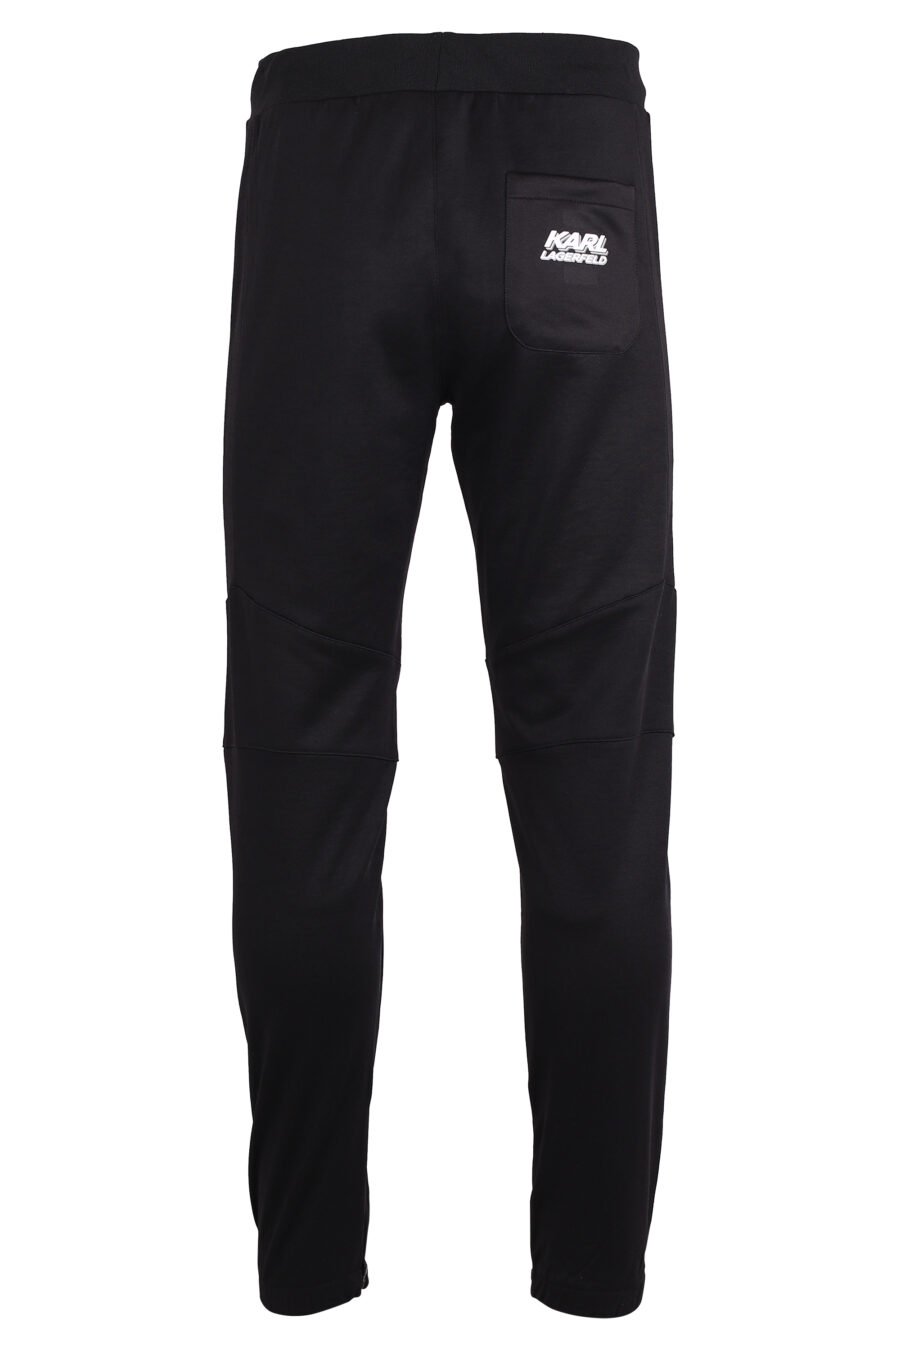 Tracksuit bottoms black with white side stripes - IMG 4382